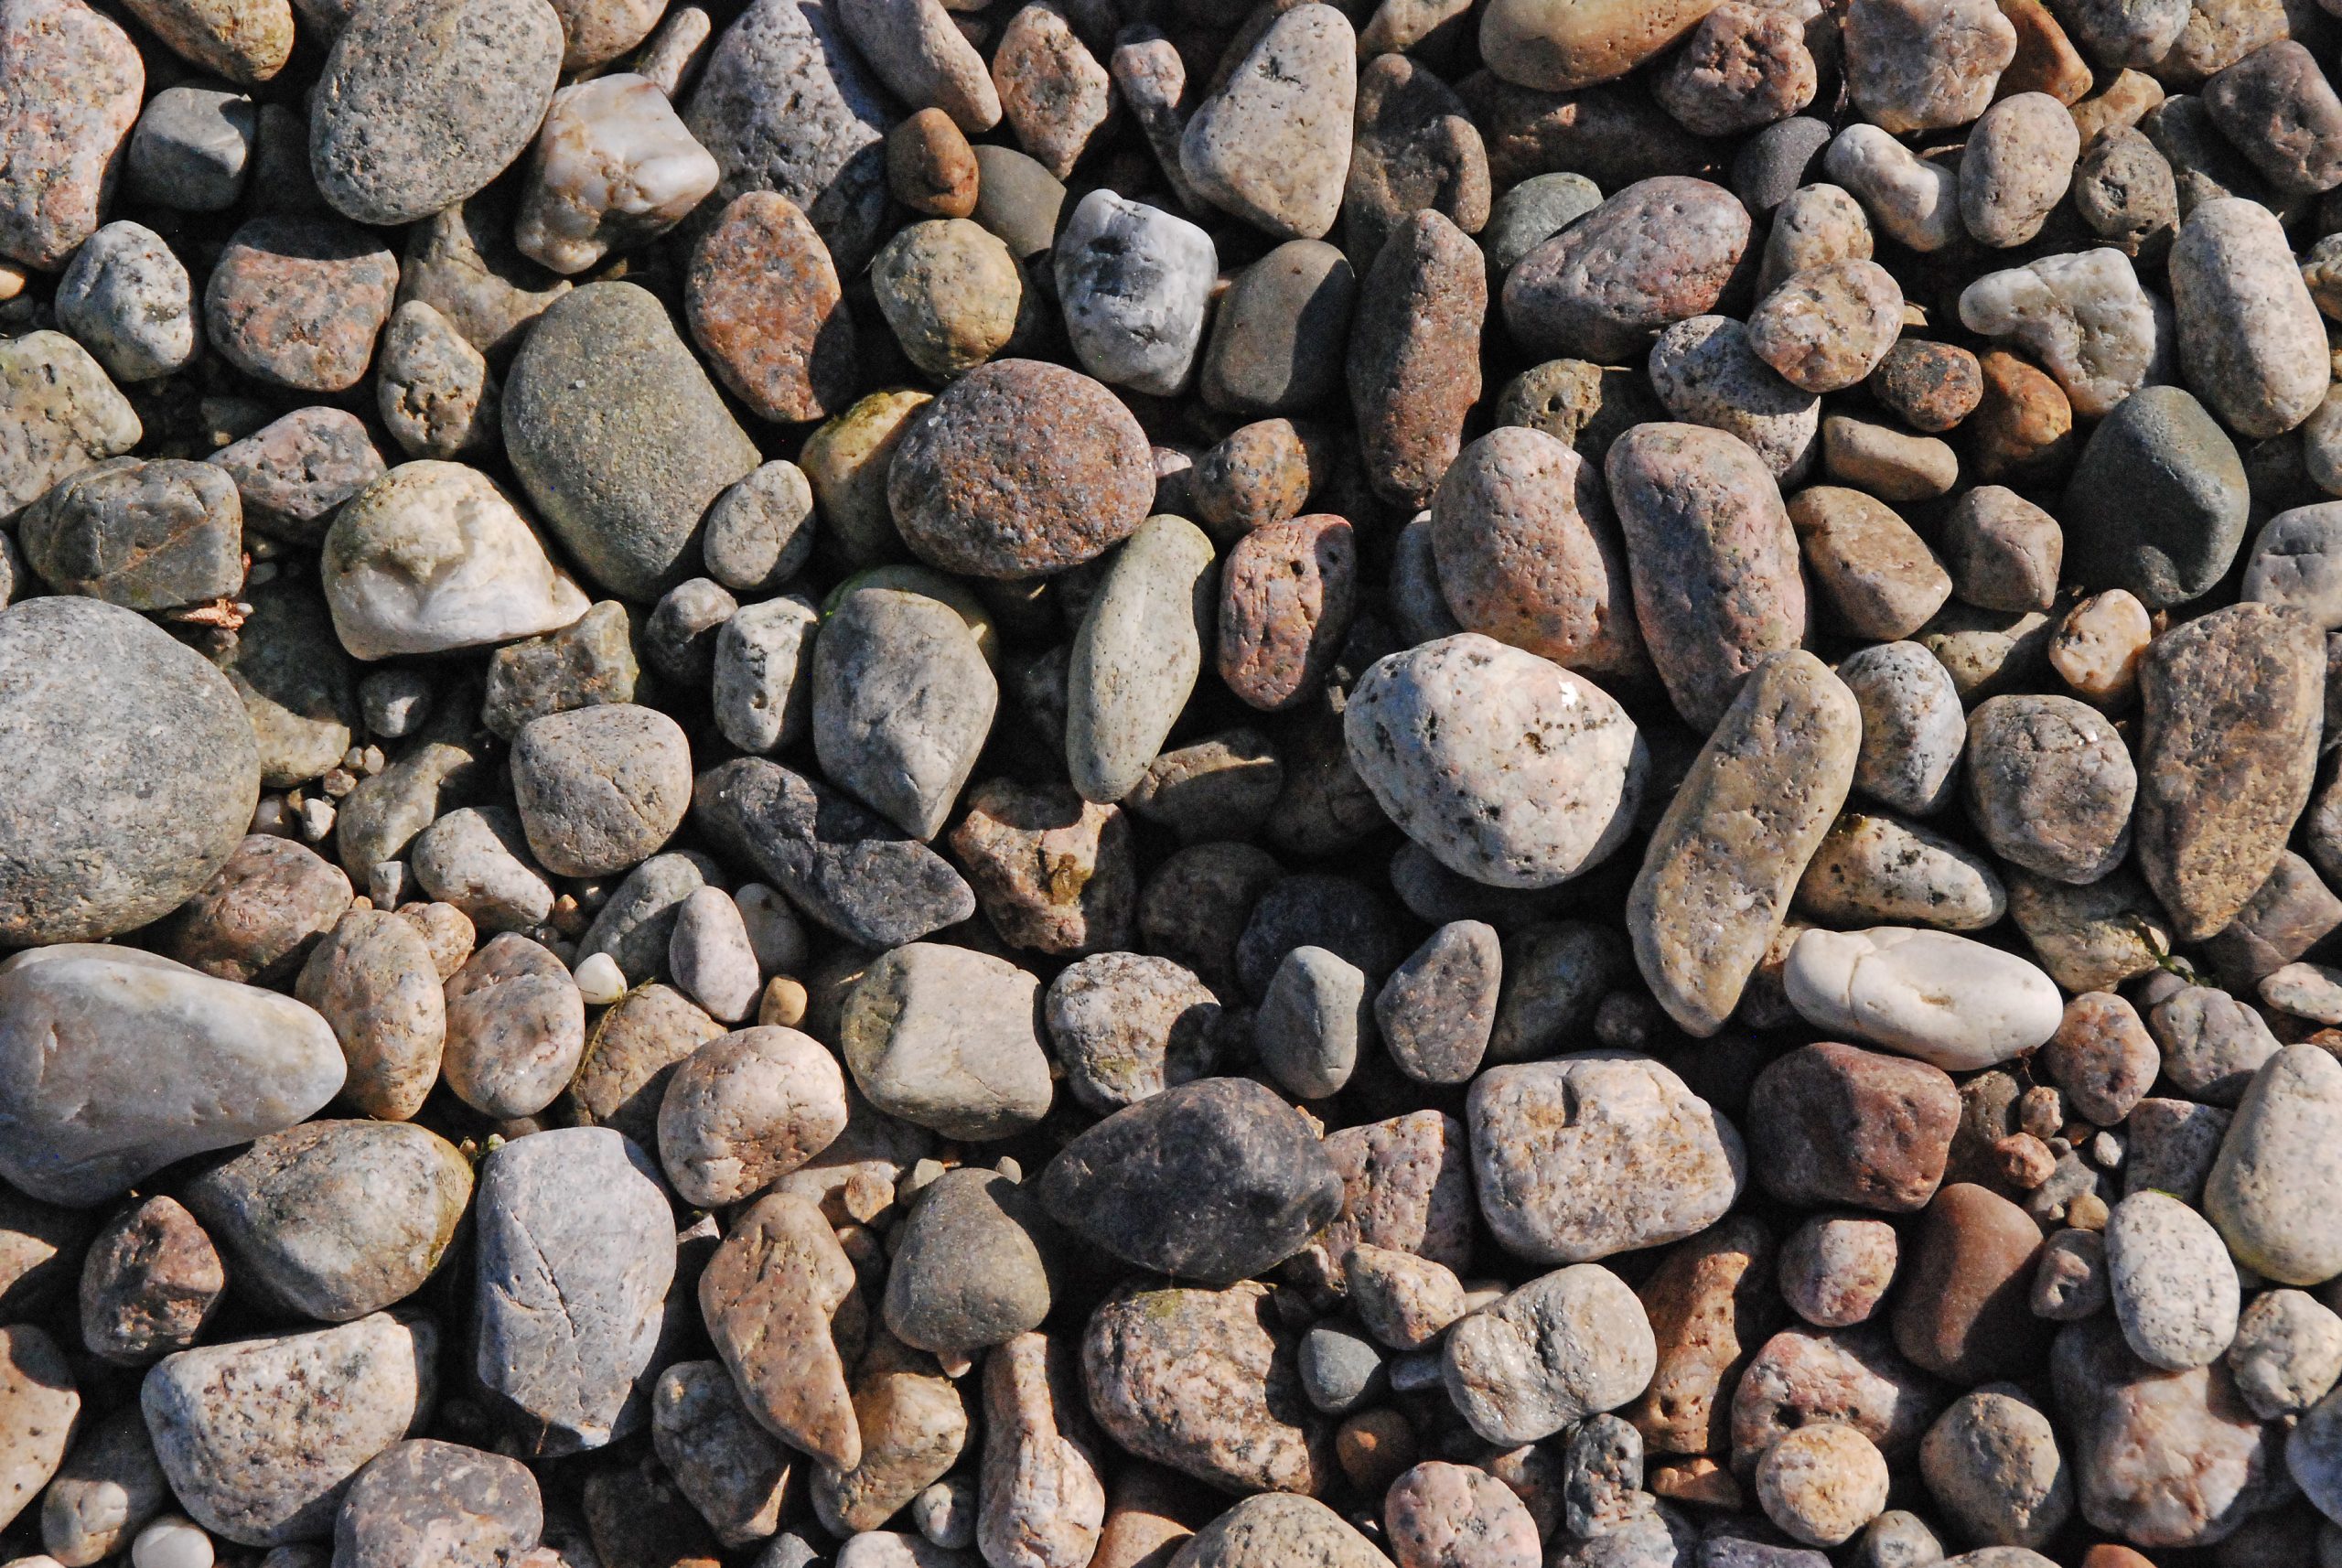 Rocks At The Beach (user submitted)